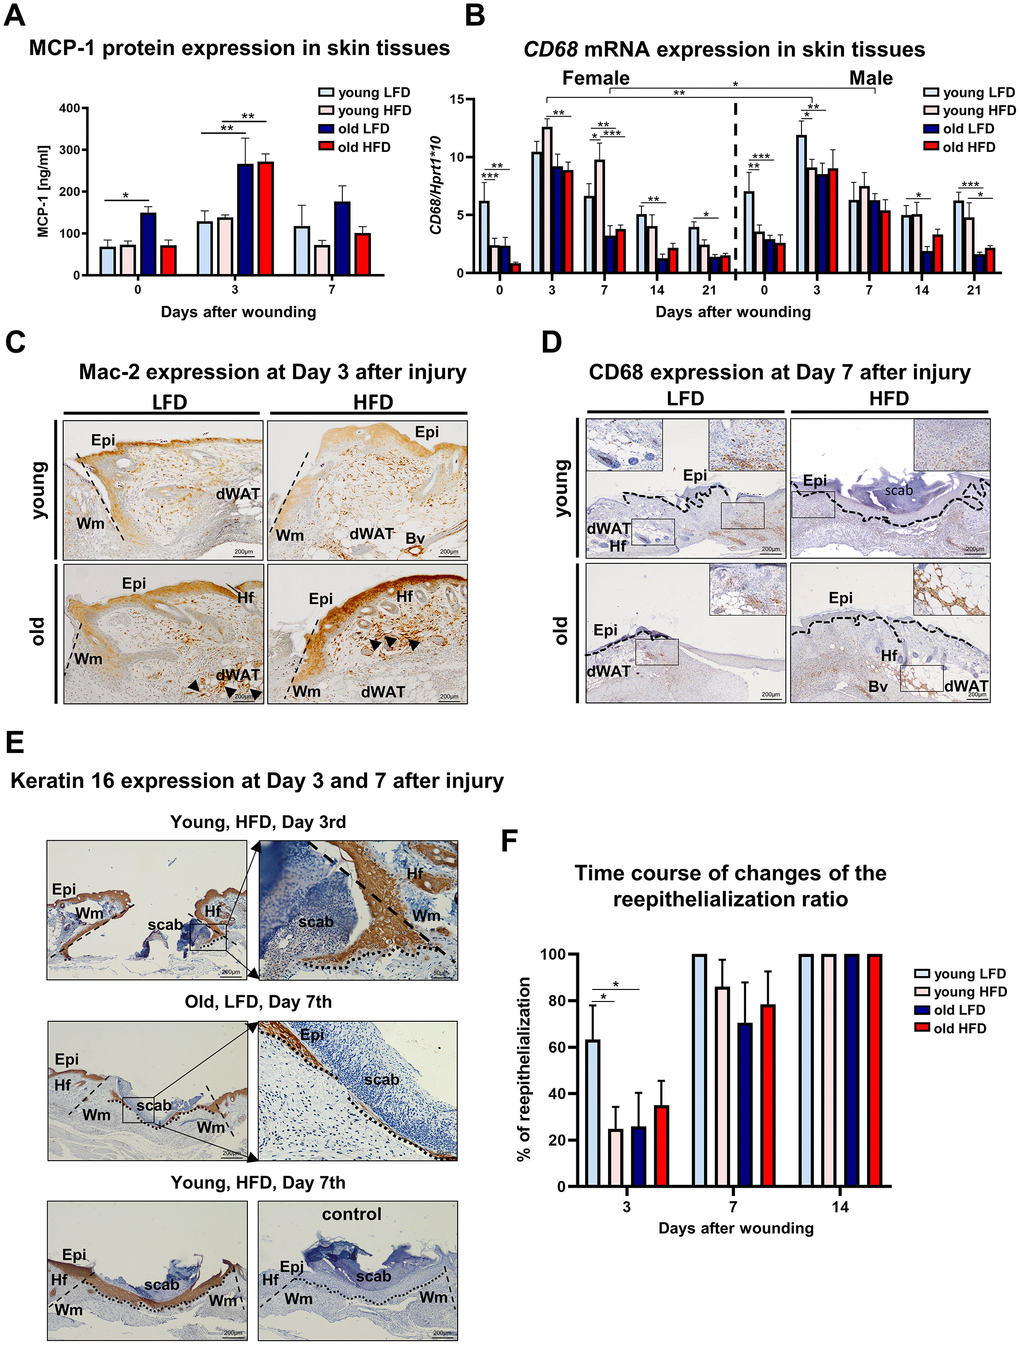 Inflammatory response and histological analysis of re-epithelialization during skin wound healing. (A) MCP-1 protein levels (n=6 skin samples per group); (B) CD68 mRNA expression (n=4-8 skin samples per group); (C) Mac-2 and (D) CD68 immunohistological localization on skin tissues at post-wounded day 3 (C) and day 7 (D). Immunohistochemical detection of keratin 16 (E) and morphometrical analysis (F) of the re-epithelization process in the skin of old, young, LFD or HFD mice (n = 3-5 mice per group). Epi - epidermis, dWAT - dermal white adipose tissue, Wm – wound margin, Hf – hair follicles; control (E) of immunohistochemical reaction where the primary antibody were omitted. Histological sections were counterstain with haematoxylin. Scale bar (C–E) 200μm, insets (C–E) 50μm. The bars indicate lsmean ±SE *p